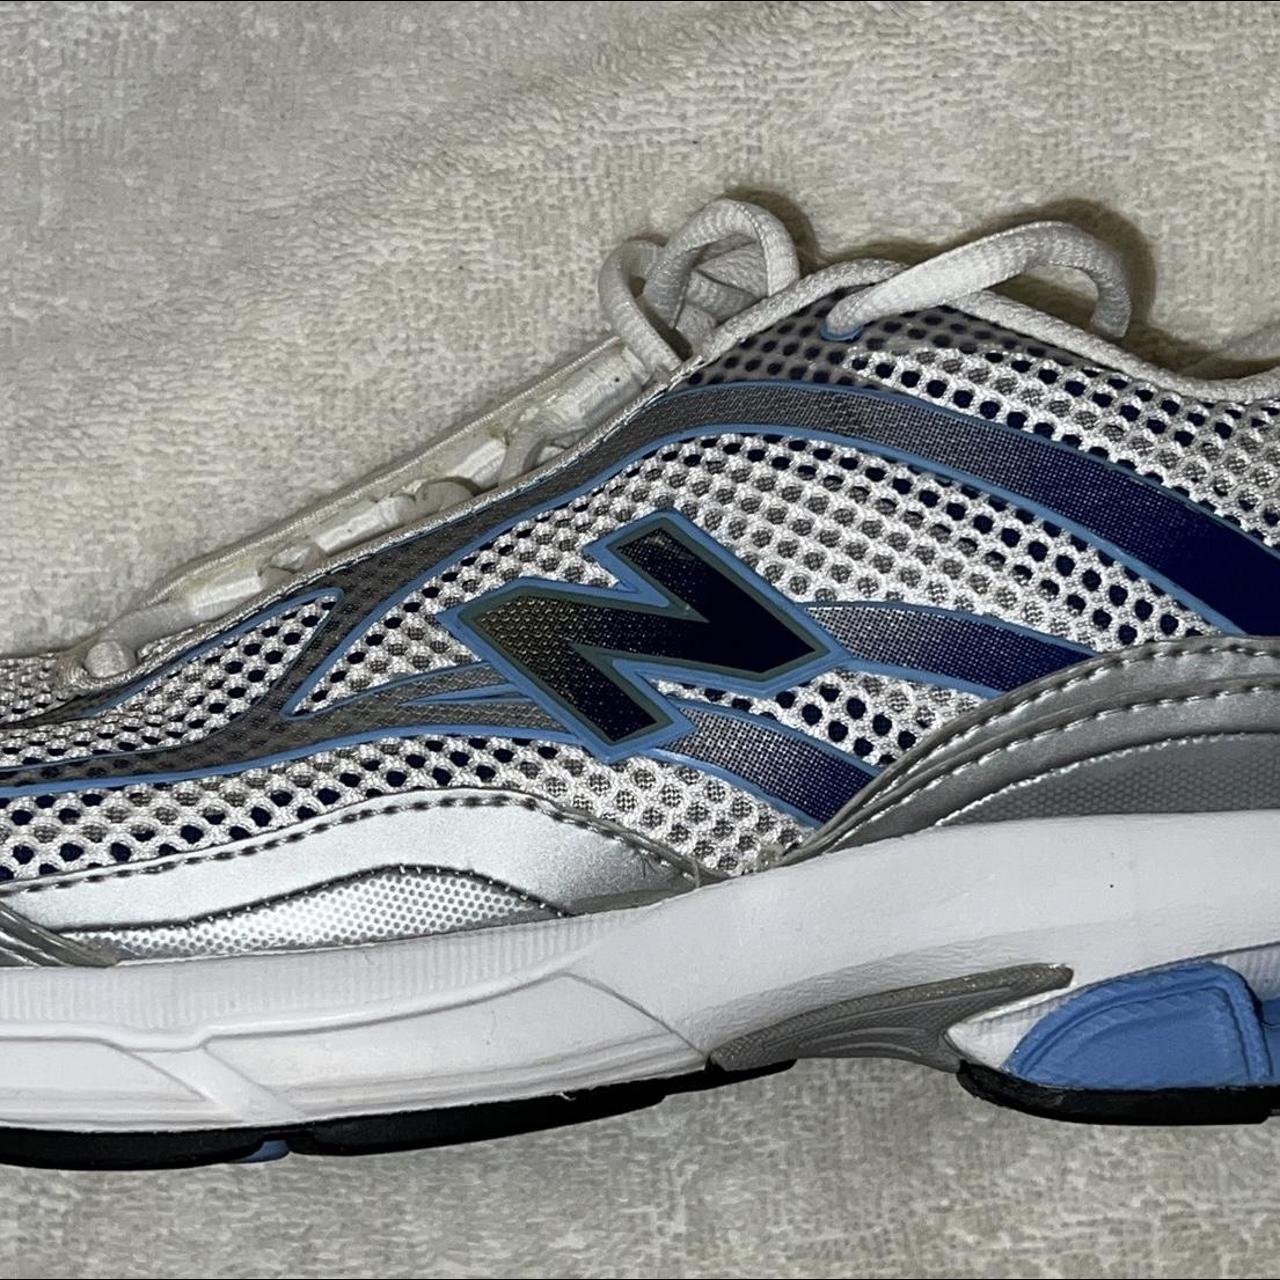 New Balance Women's Blue and Silver Trainers (2)